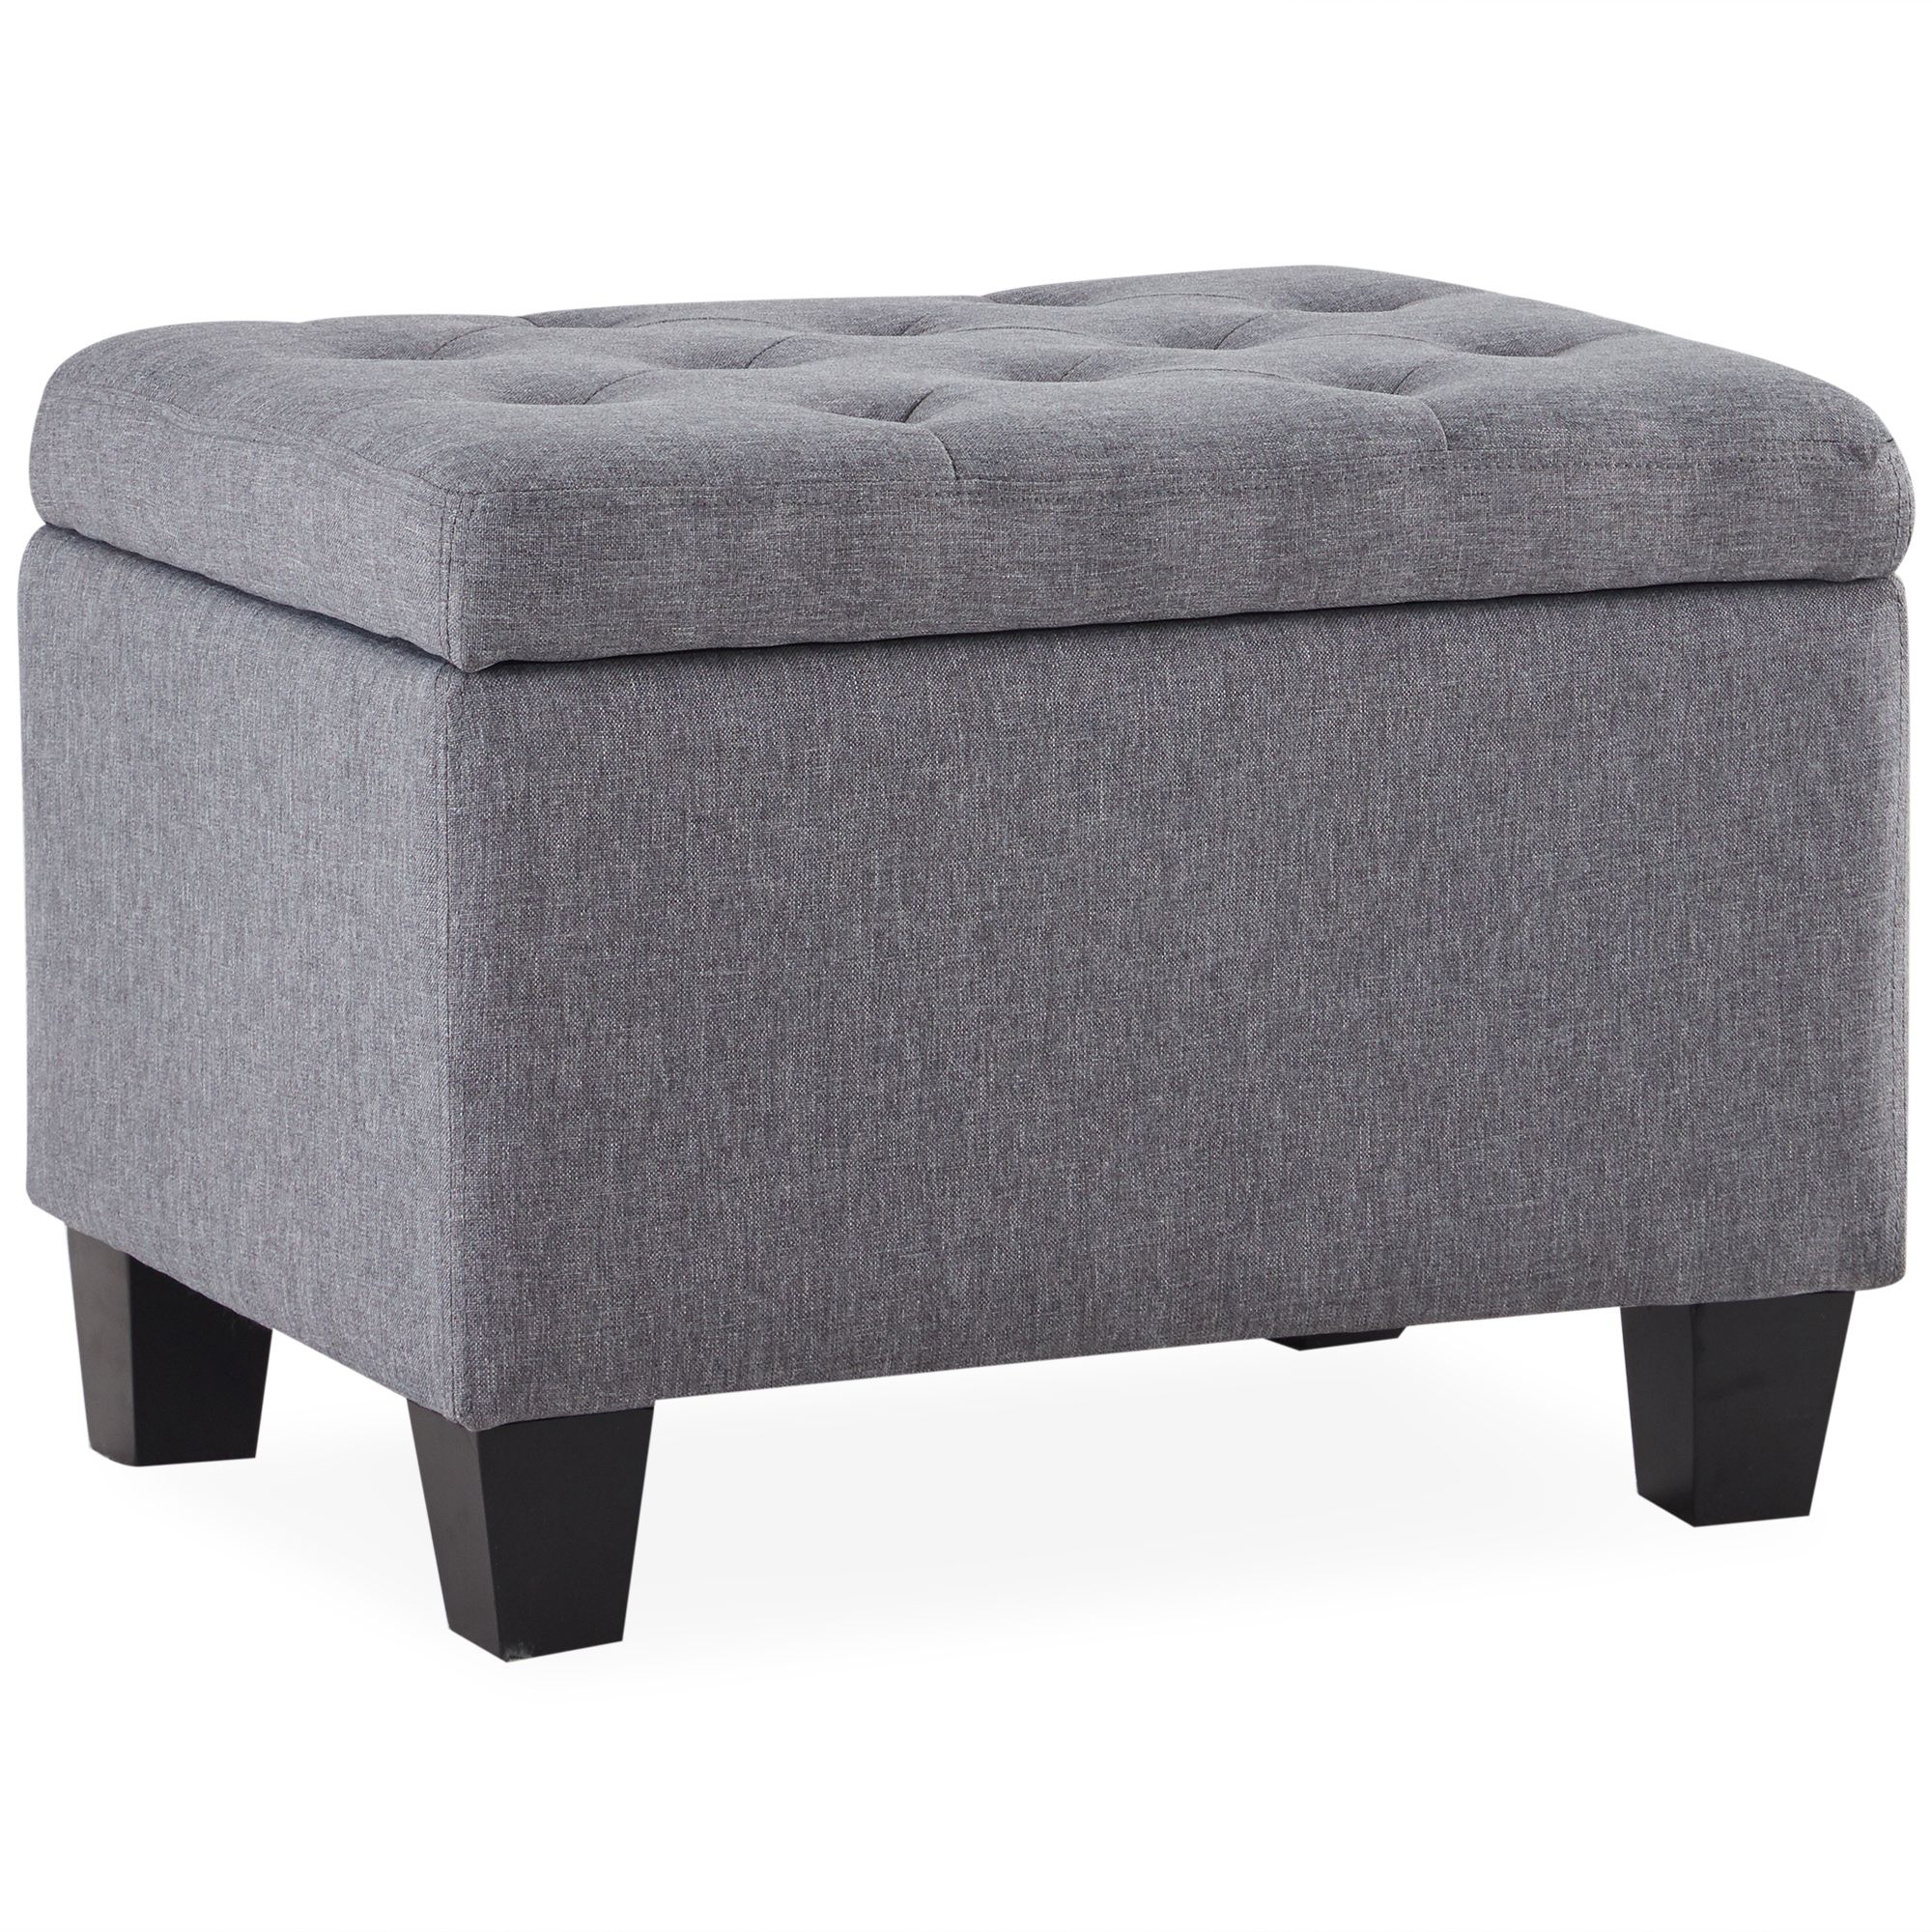 Belleze Modern Tufted Storage Ottoman Lift Top Rectangle Footstool Intended For Linen Tufted Lift Top Storage Trunk (View 7 of 20)